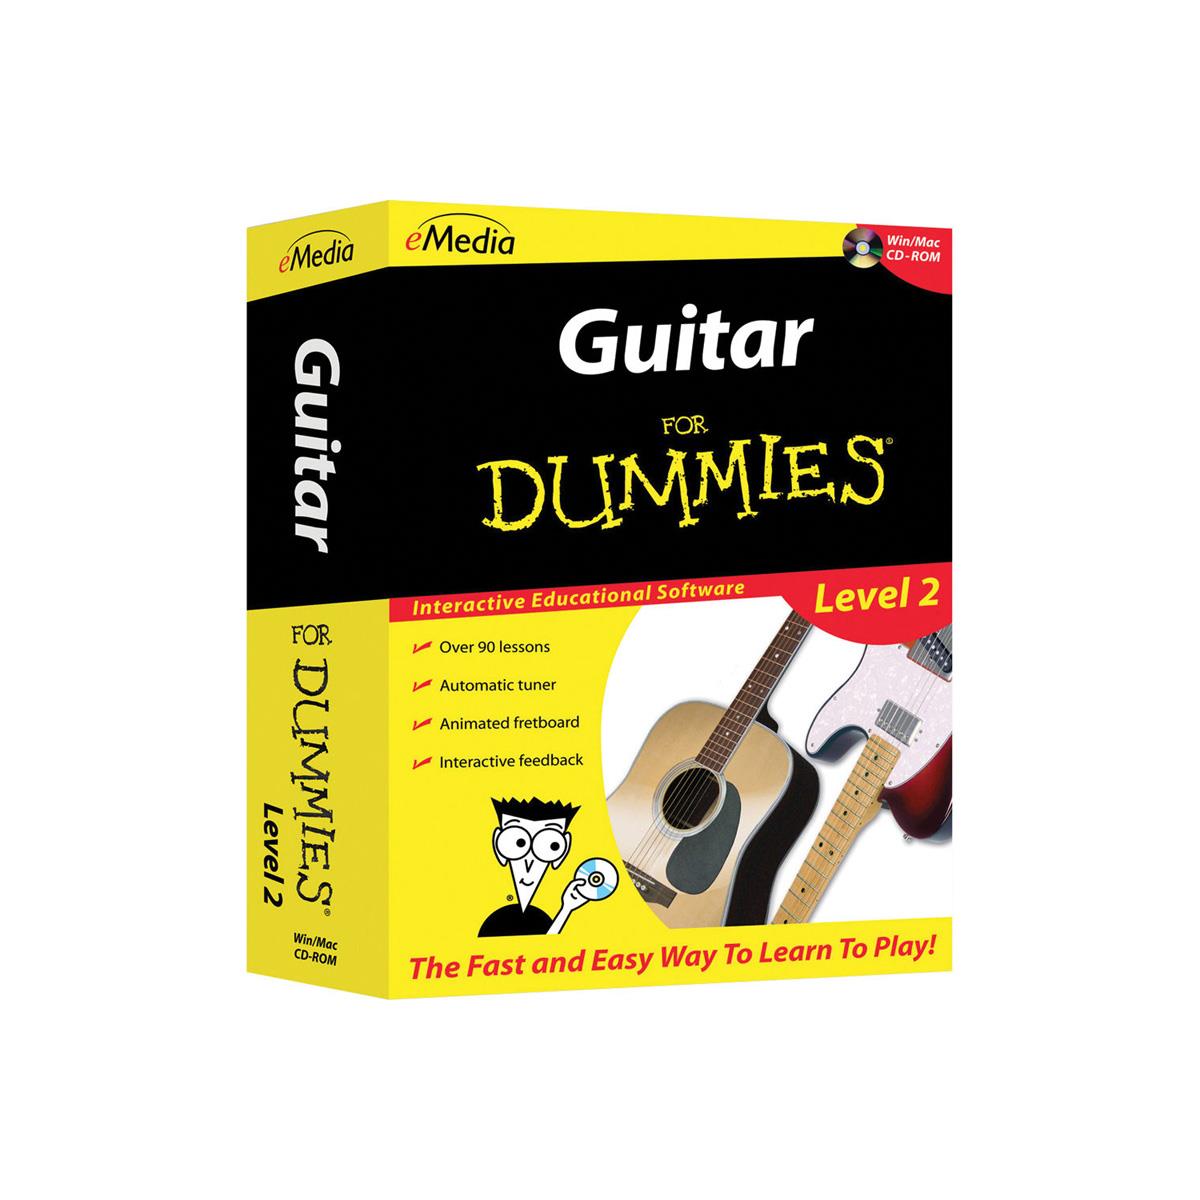 eMedia Guitar For Dummies Level 2 Software for Mac, Electronic Download -  FD09107DLM